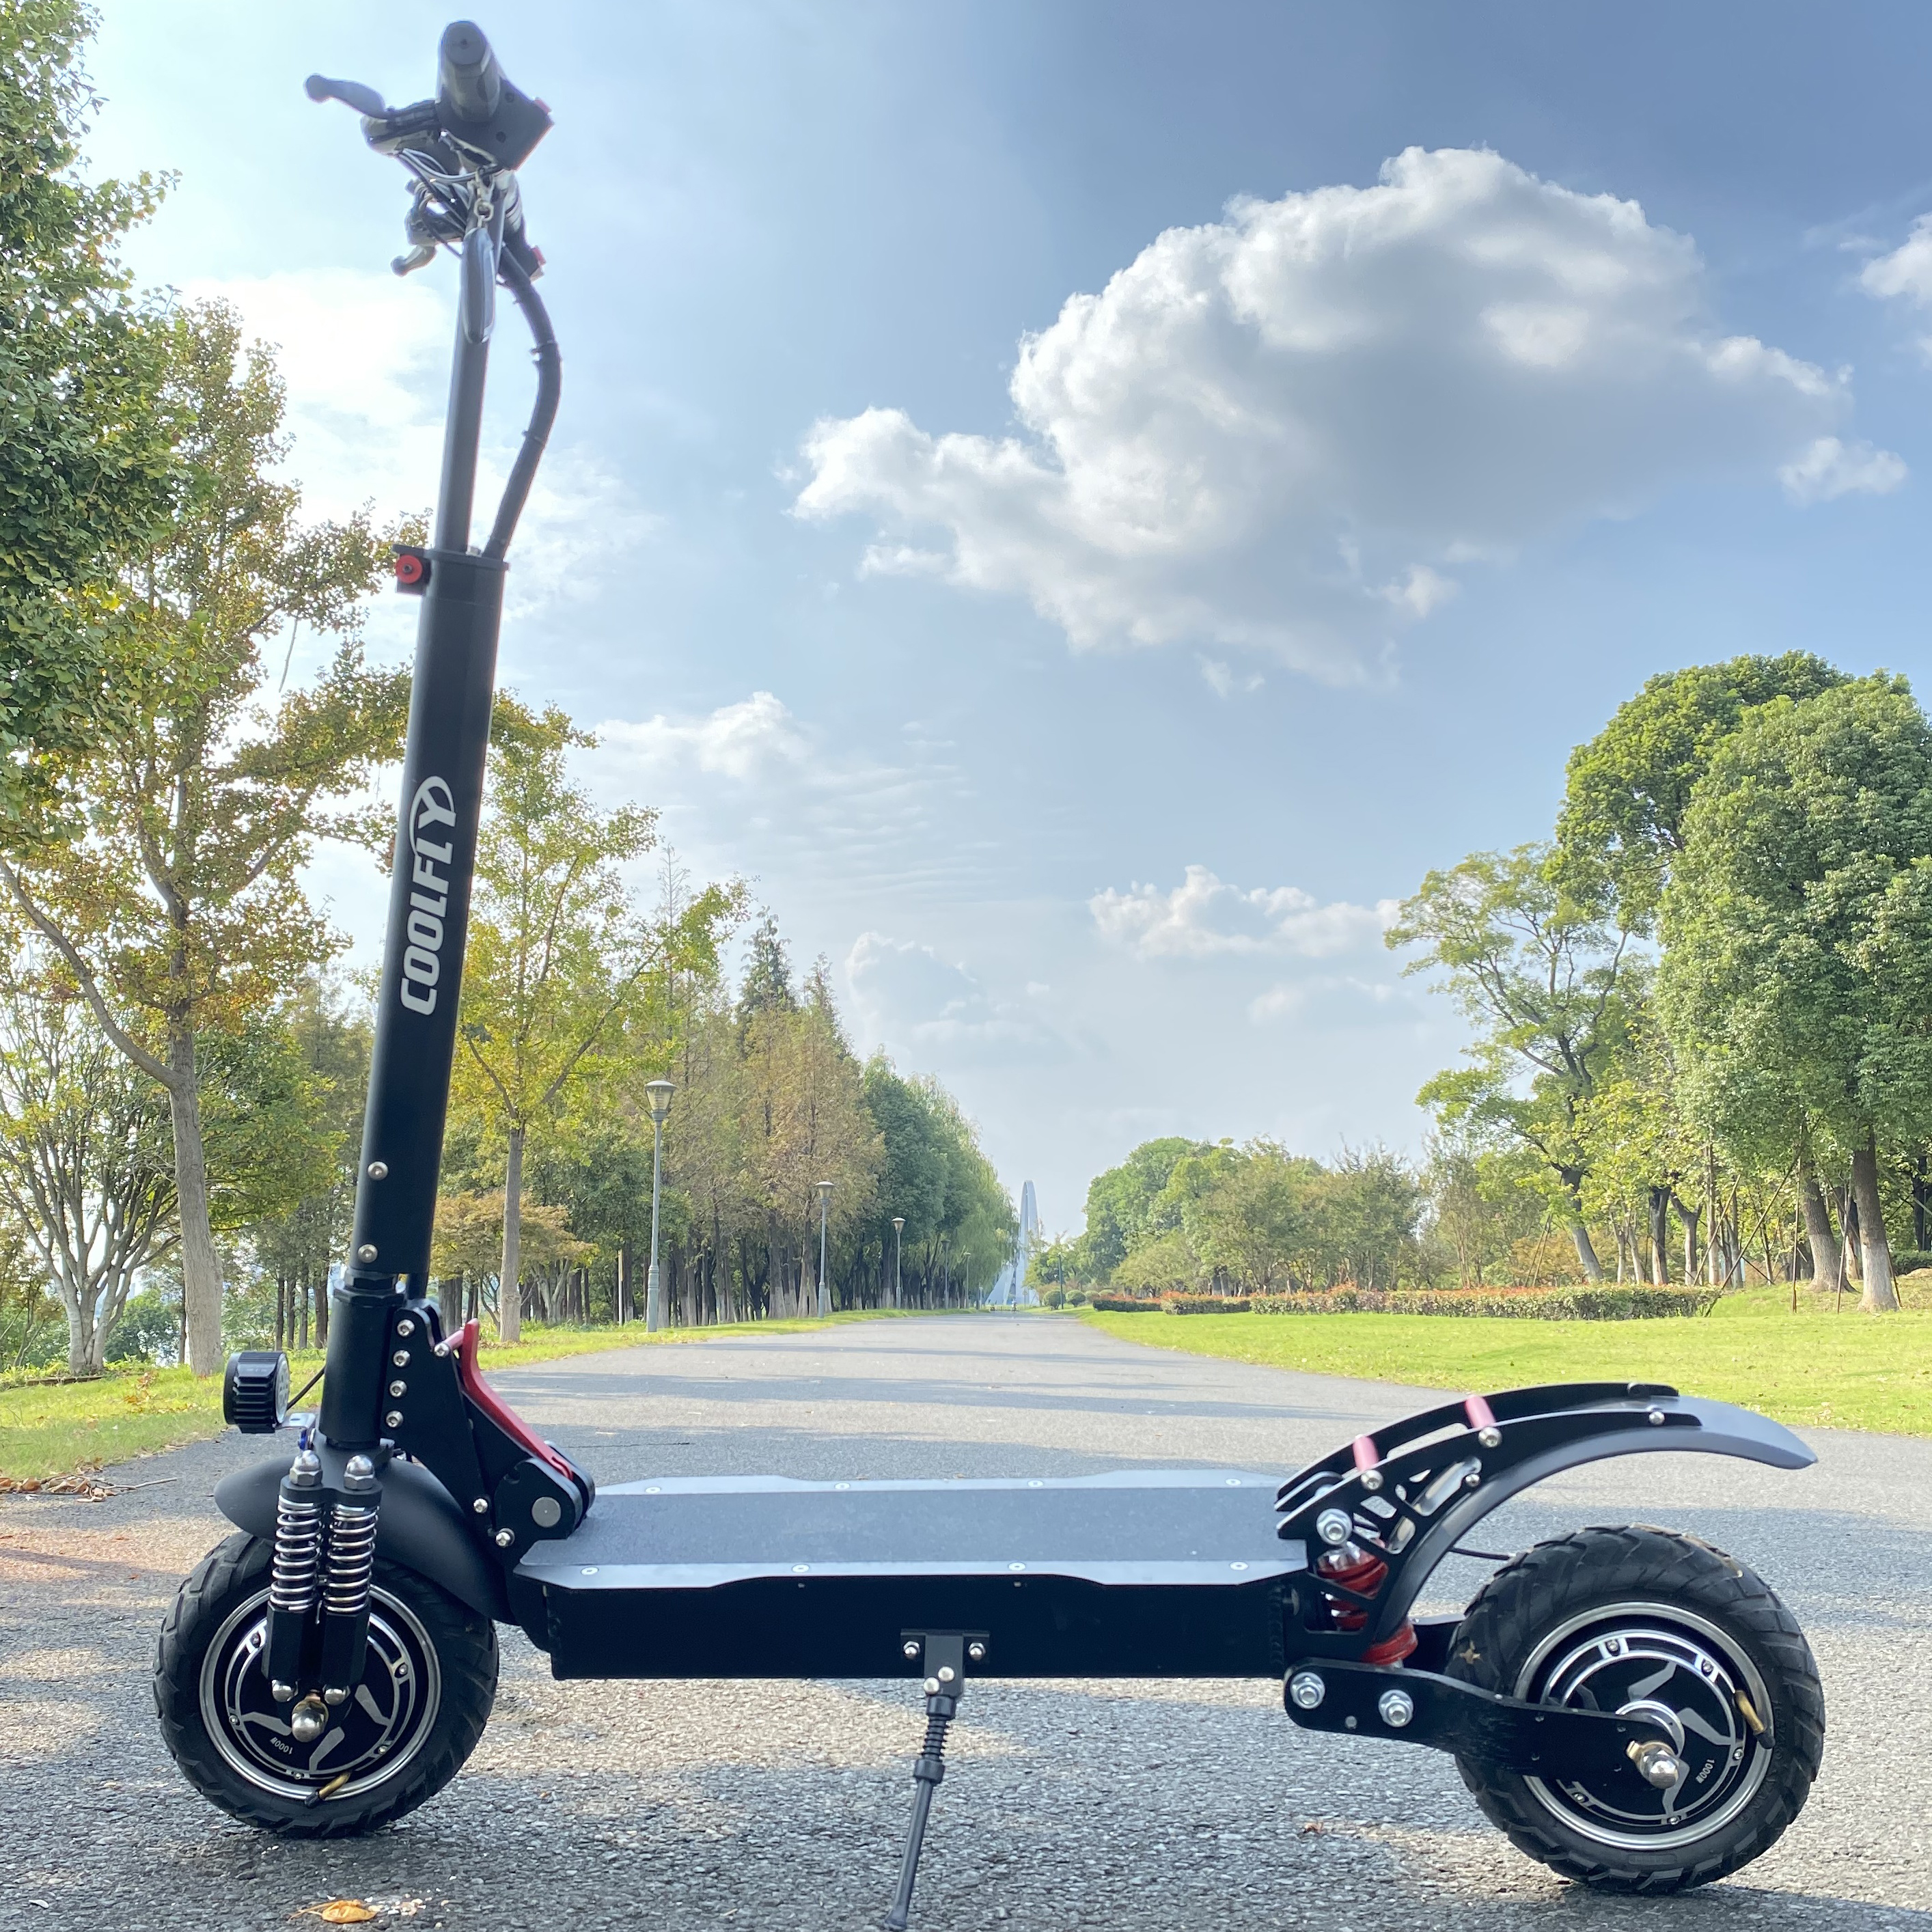 CF-D10-2B 48V 1600-2000W 15.6AH Stylish Cross Country E-scooter Dual Motors Off Road Folding Electric Scooter 